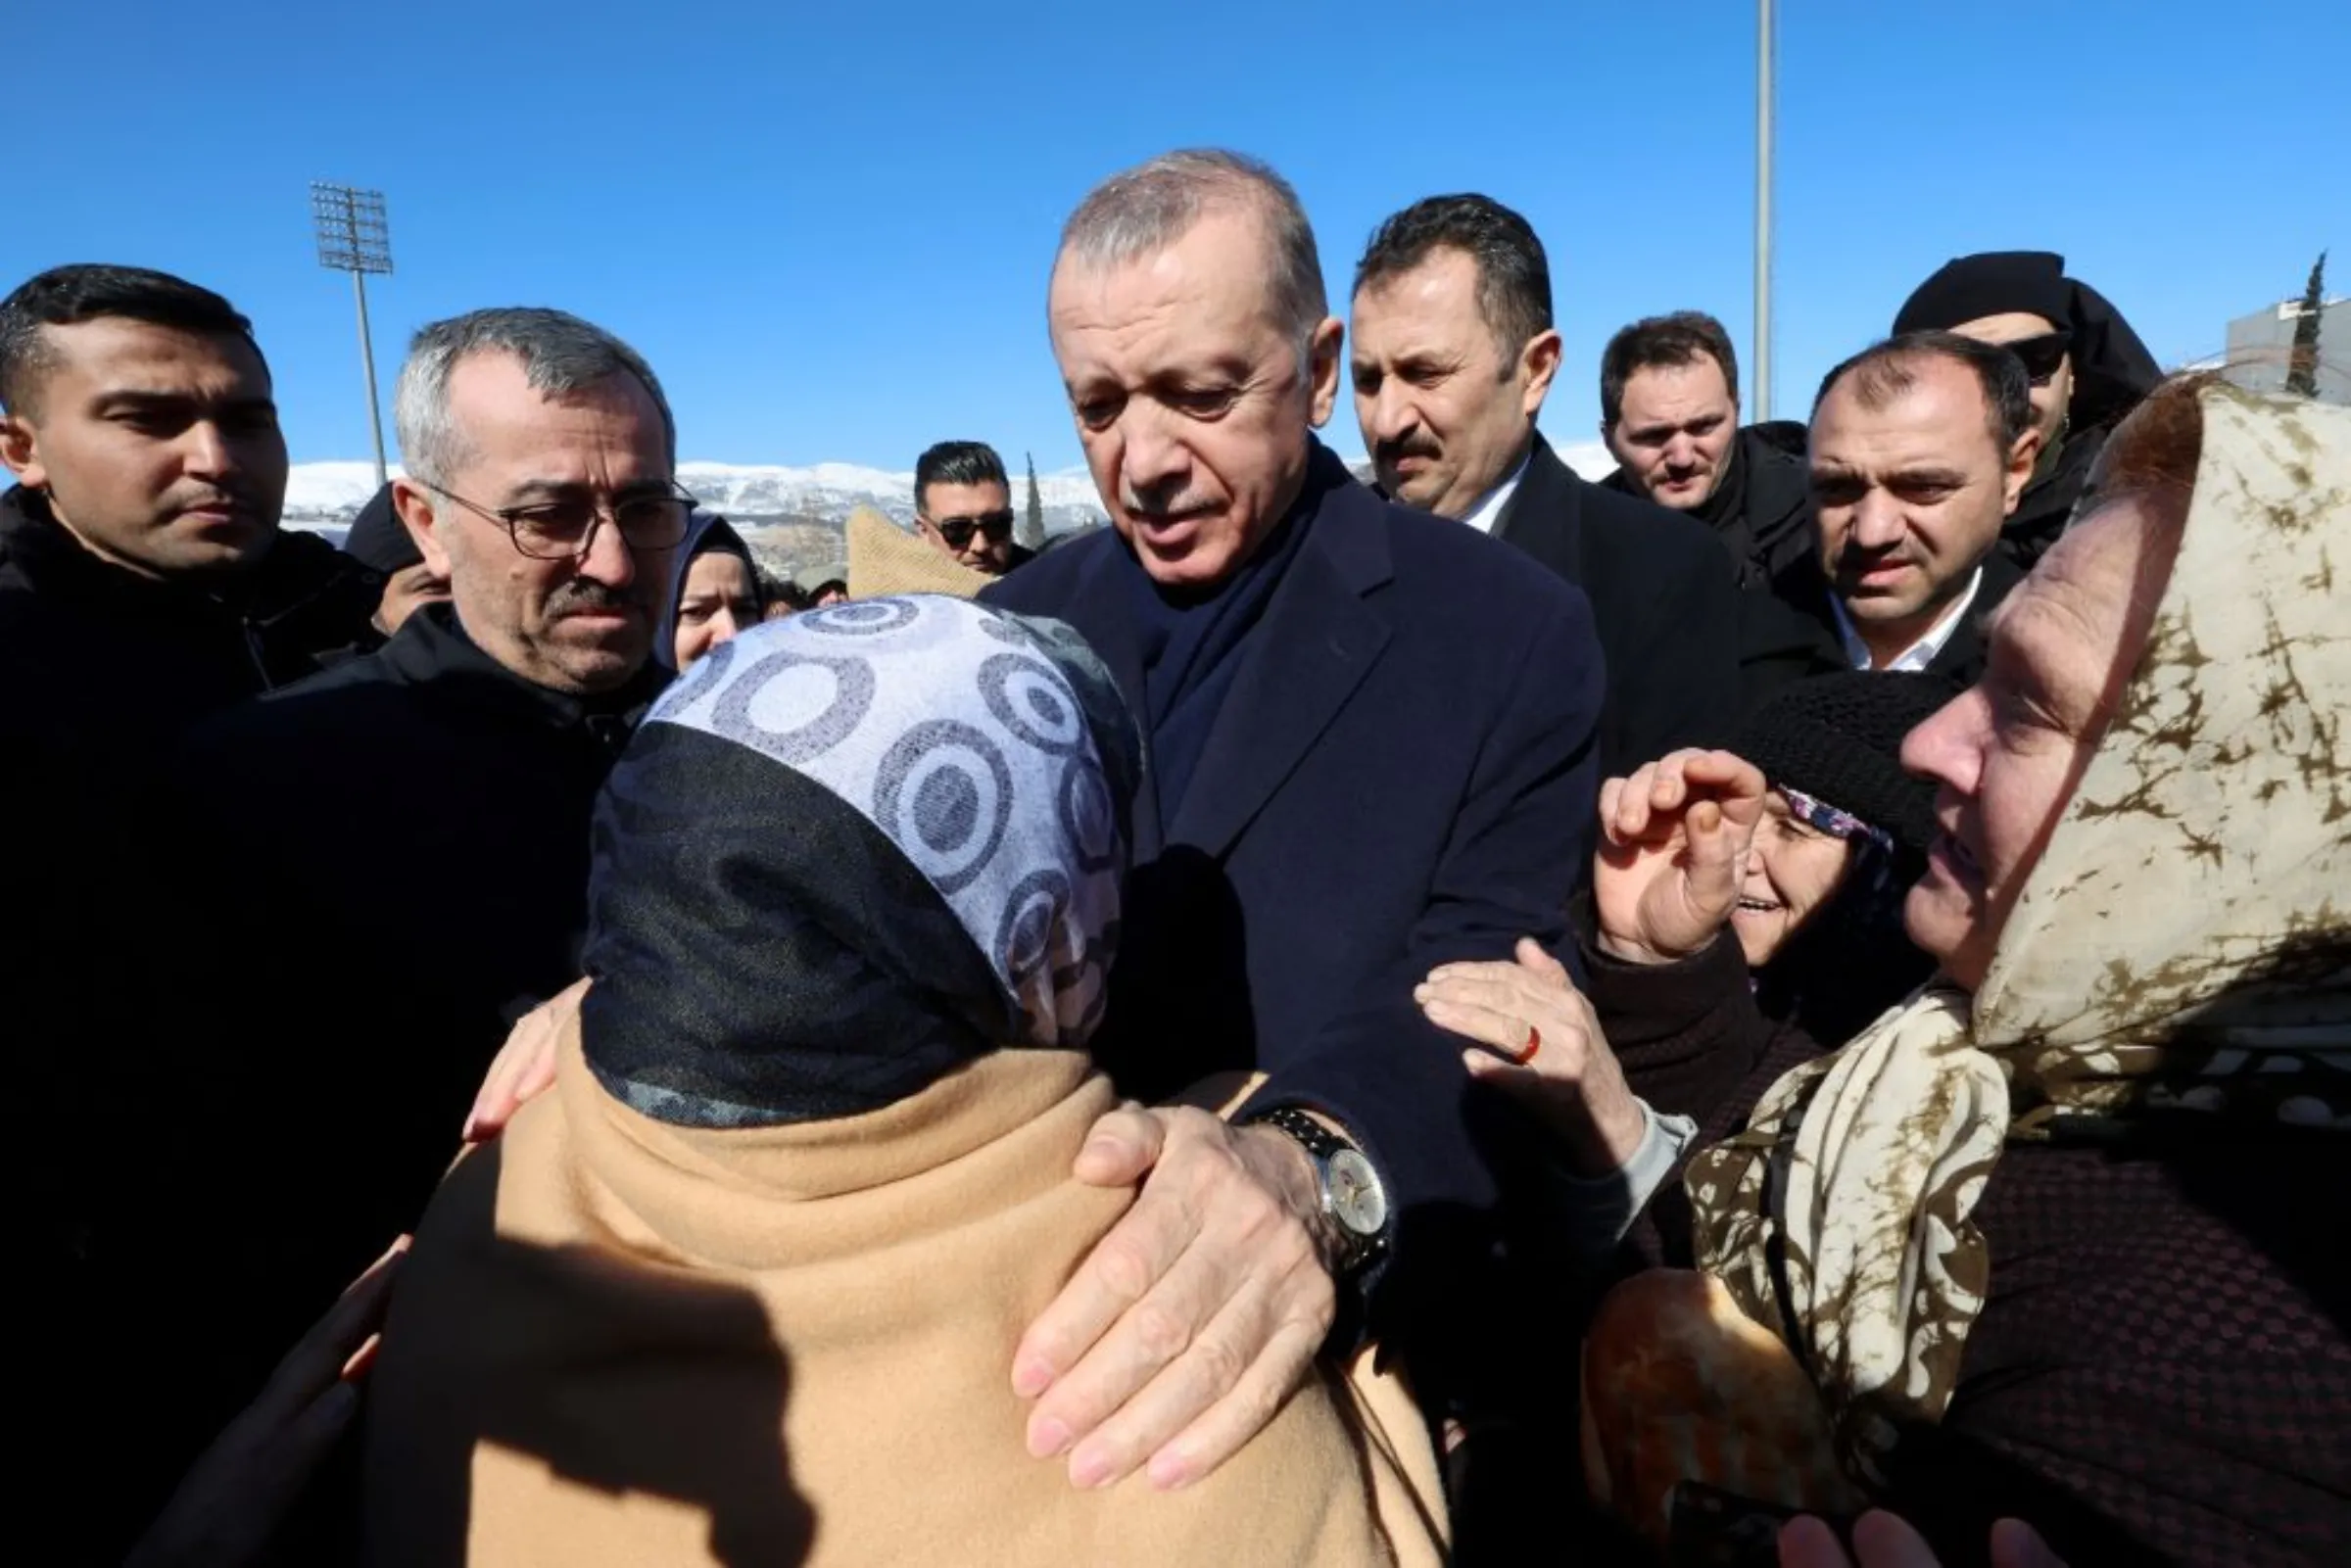 Turkish President Tayyip Erdogan meets with people in the aftermath of a deadly earthquake in Kahramanmaras, Turkey February 8, 2023